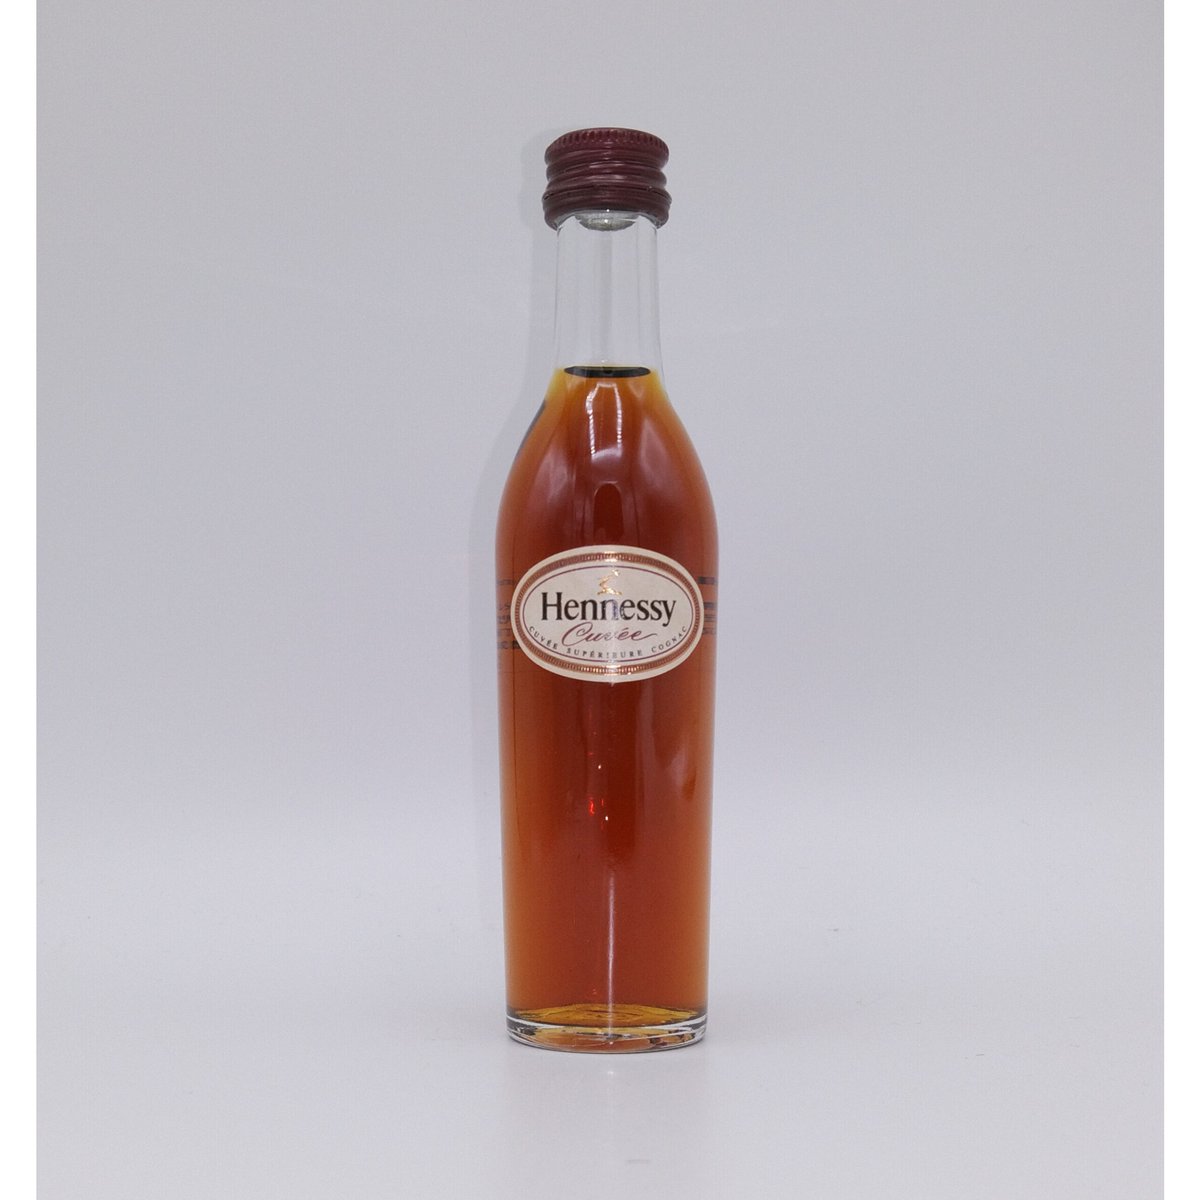 HENNESSY CUVE SUPERIEURE COGNAC 700ミリリット